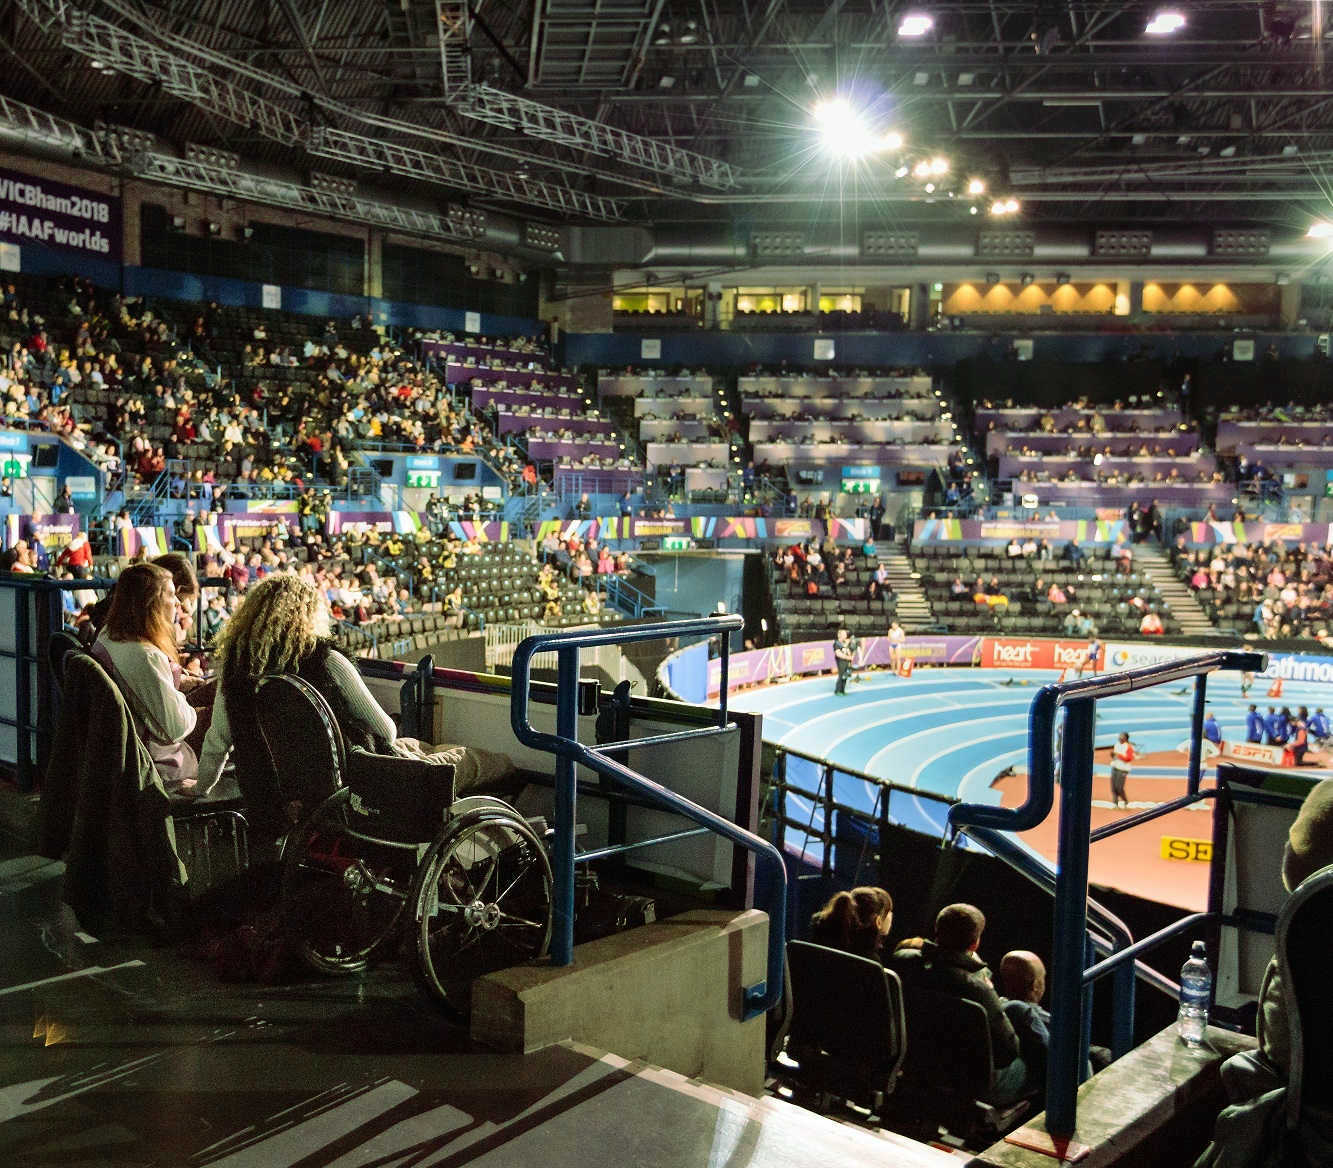 Interior shot of a sports arena with wheelchair accessible seating